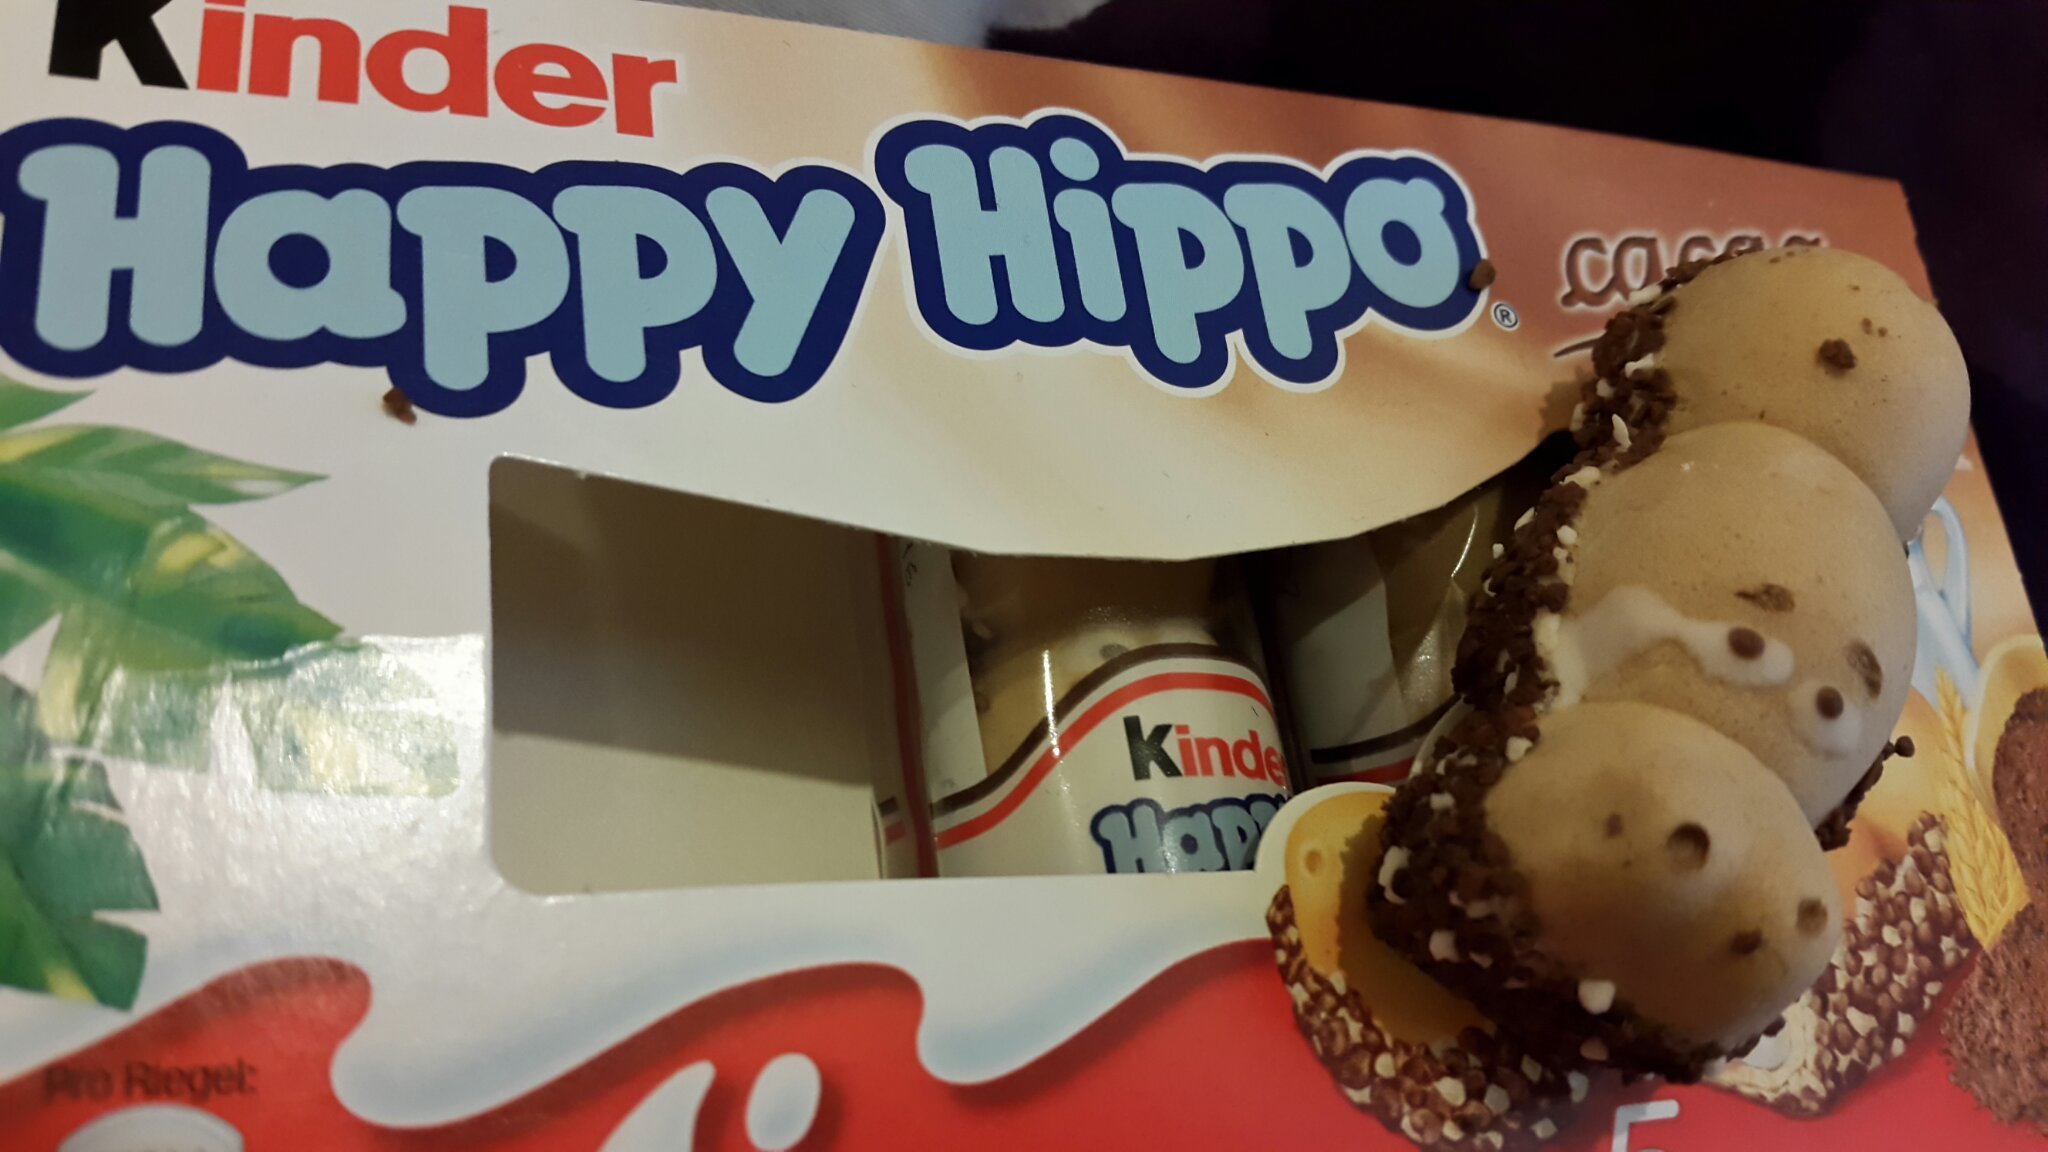 Even my happy hippo is crying! :'( - meme